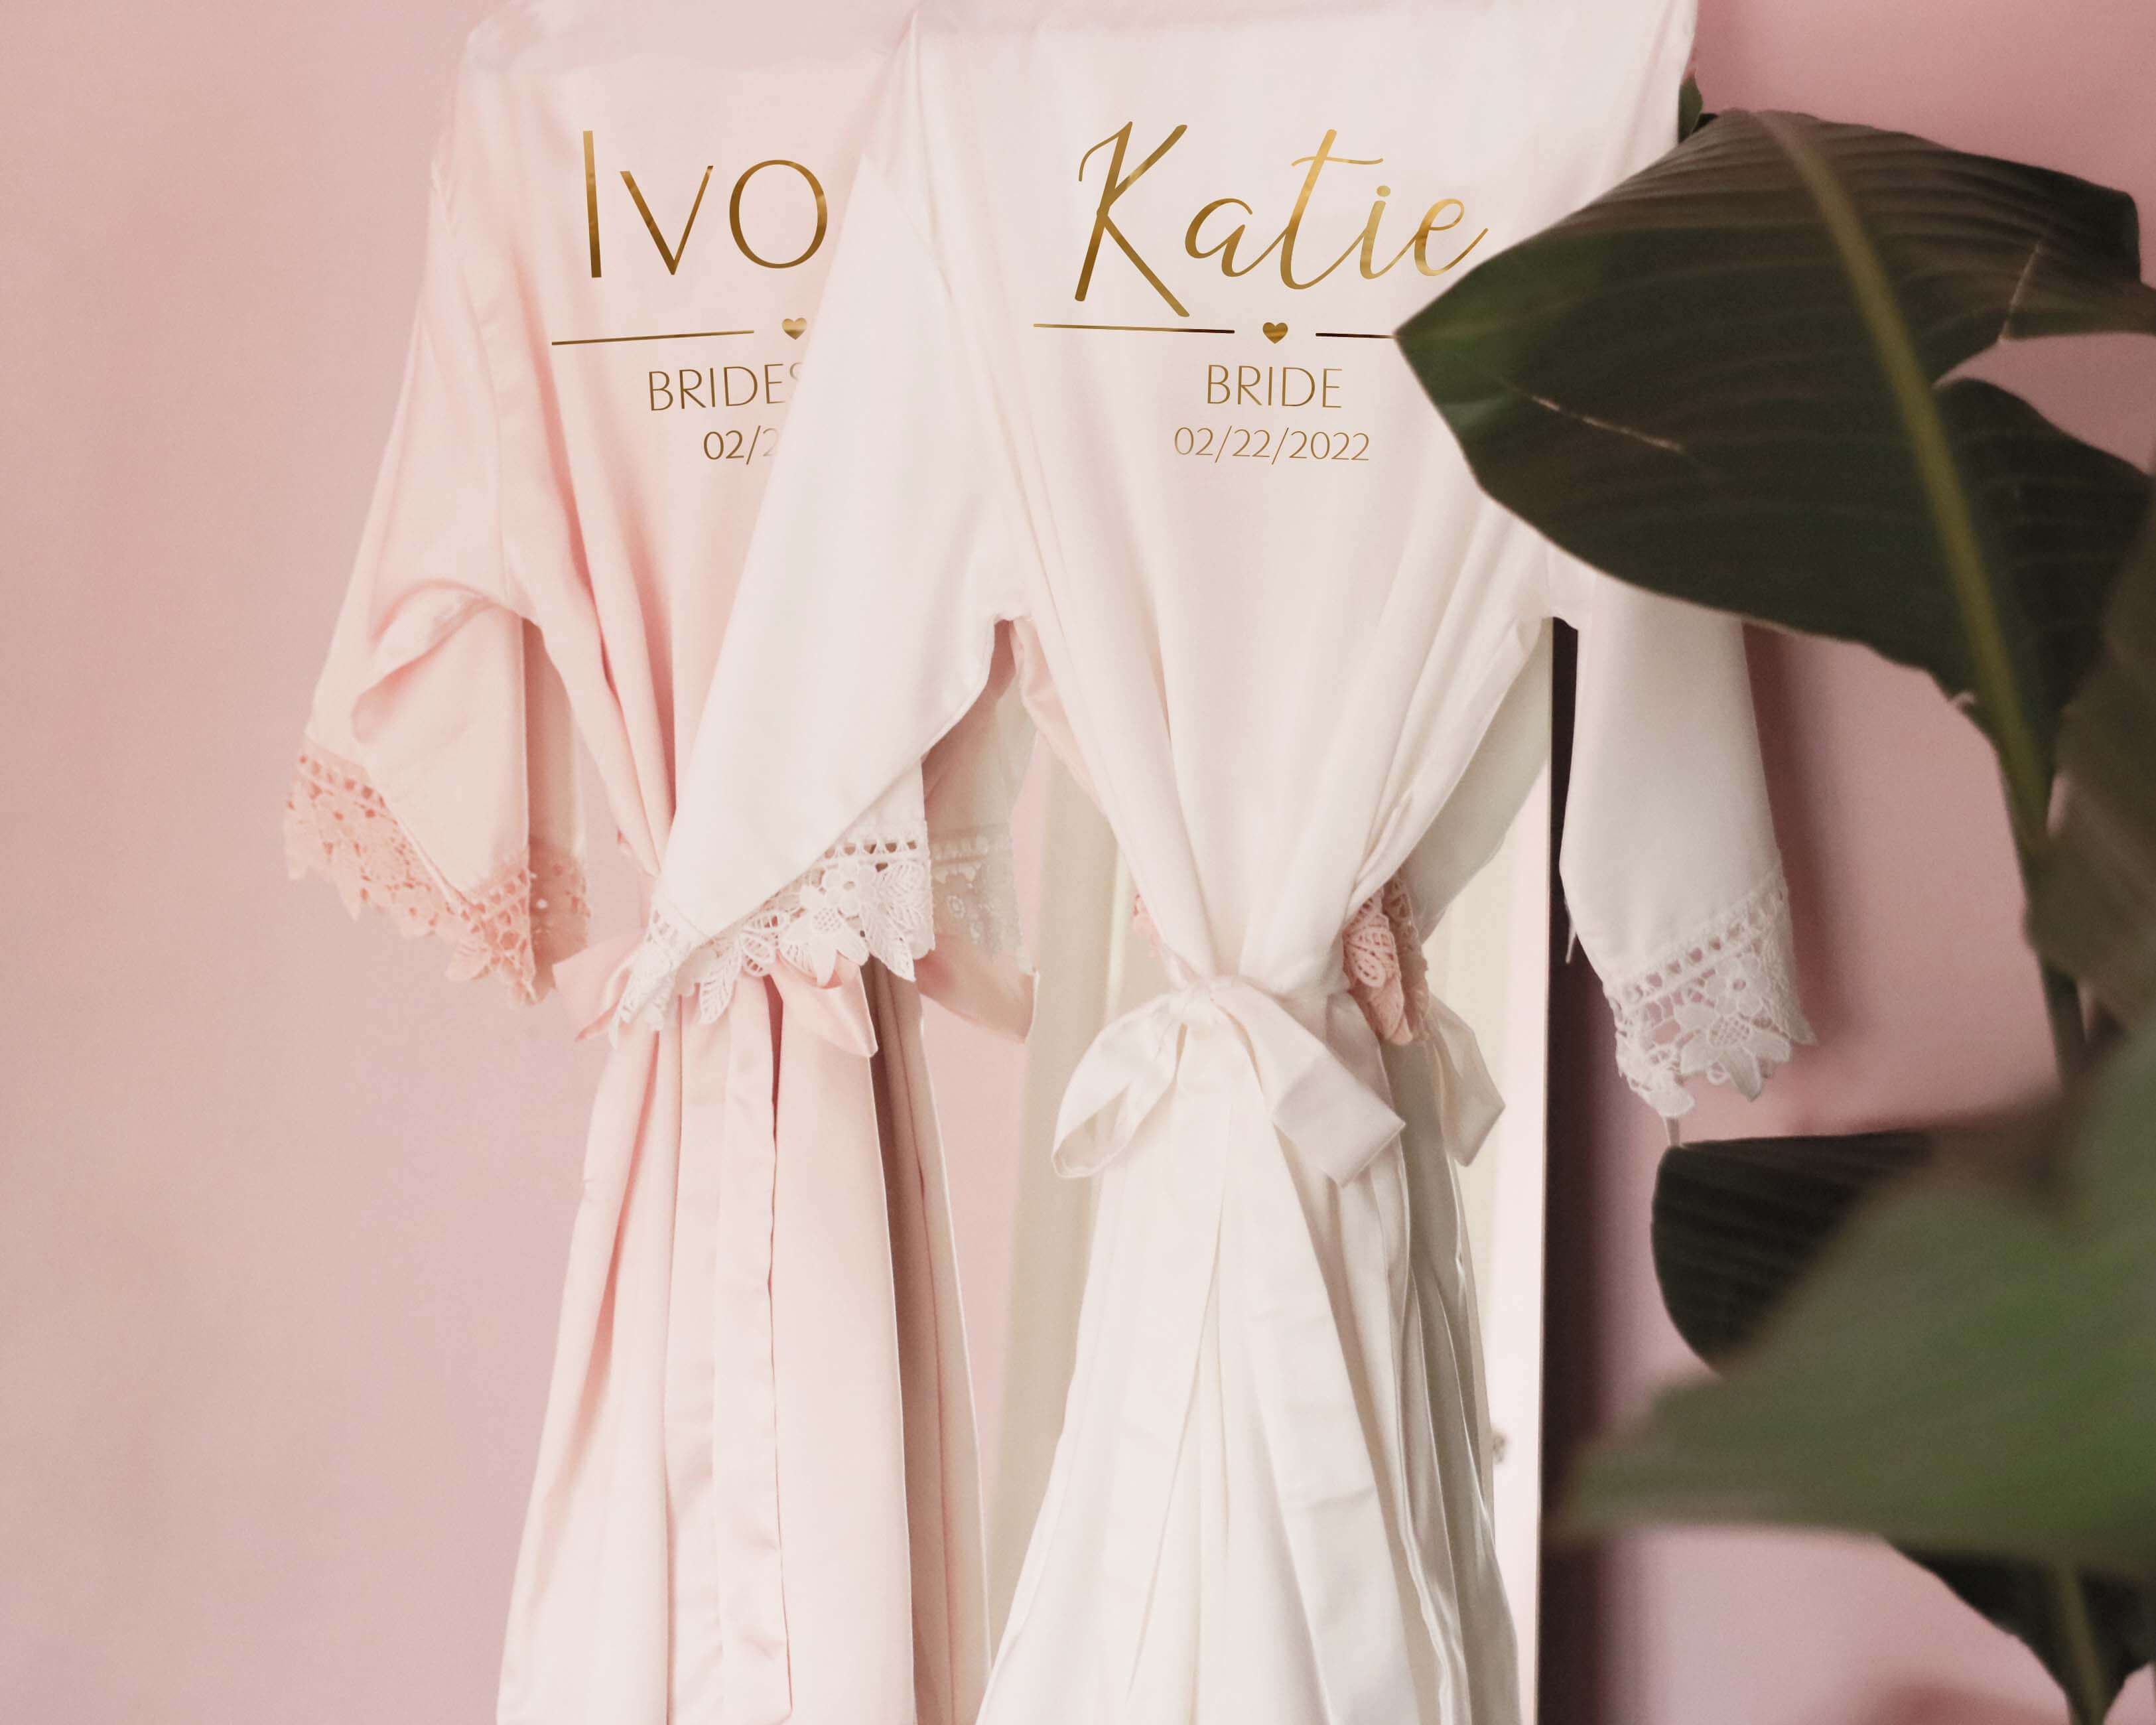 Satin Bridesmaid Robes - Personalized Blush and White Satin Bridesmaid robe with monogram on the back of the robe.